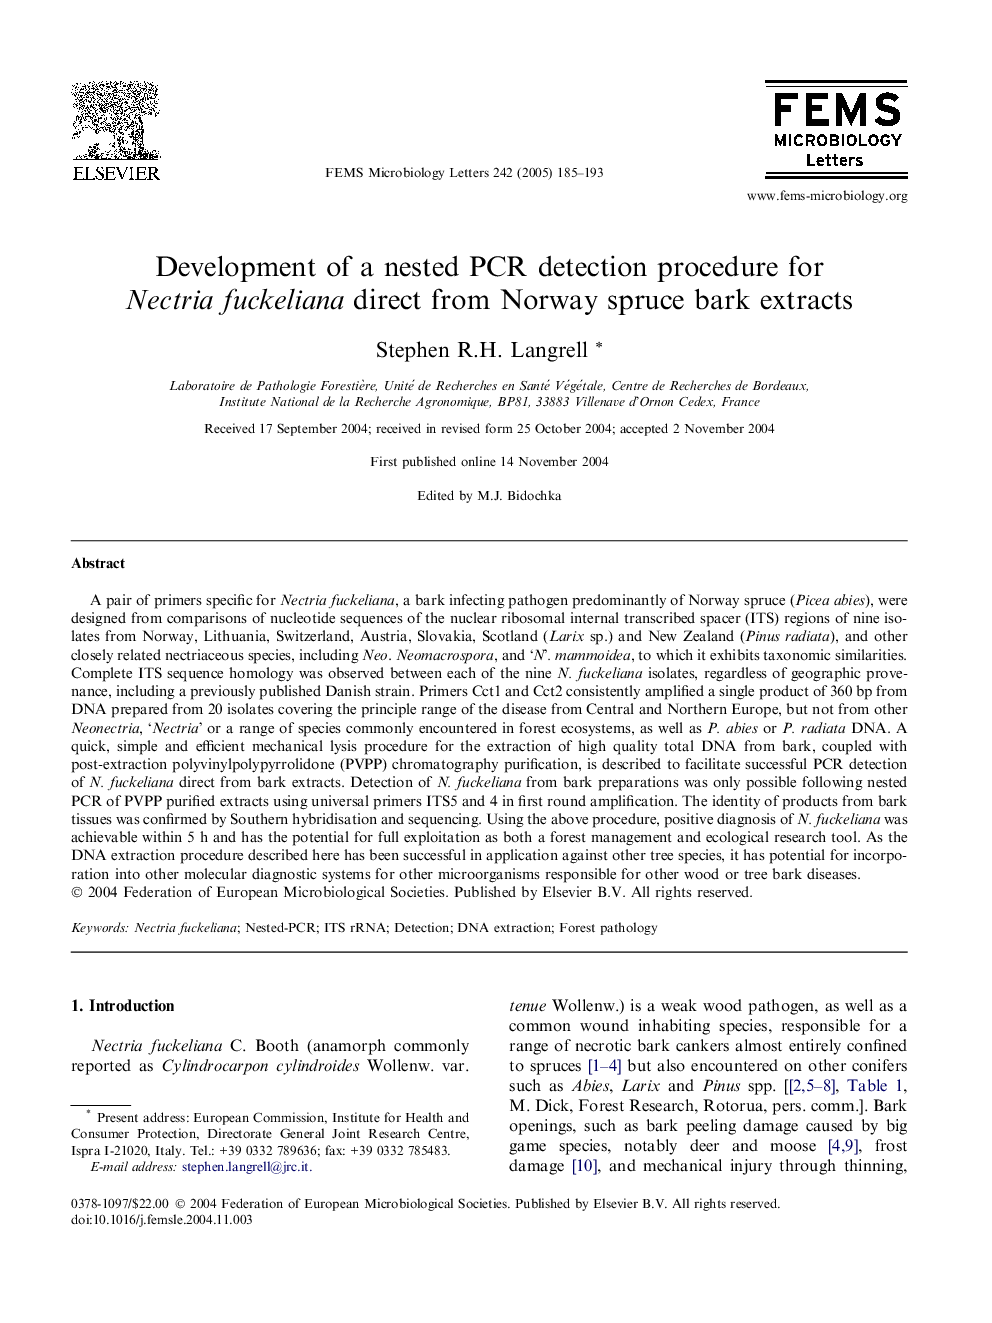 Development of a nested PCR detection procedure for Nectria fuckeliana direct from Norway spruce bark extracts